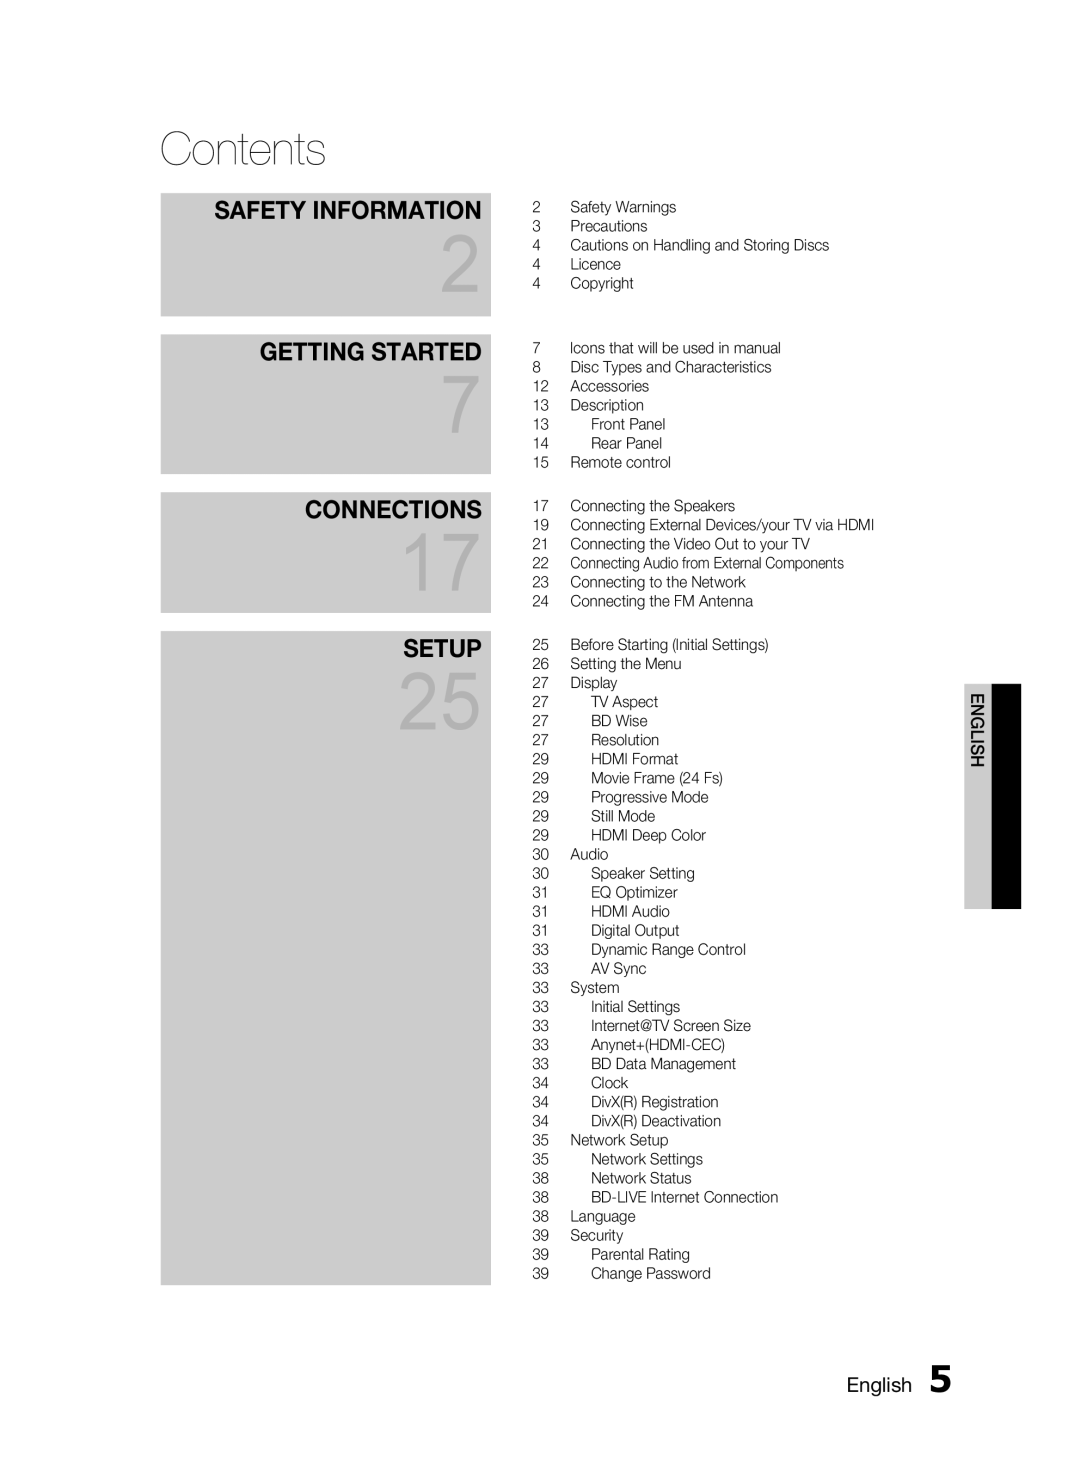 Samsung HT-C5200 user manual Contents, Getting Started, Connections, Setup, Safety Information, English 